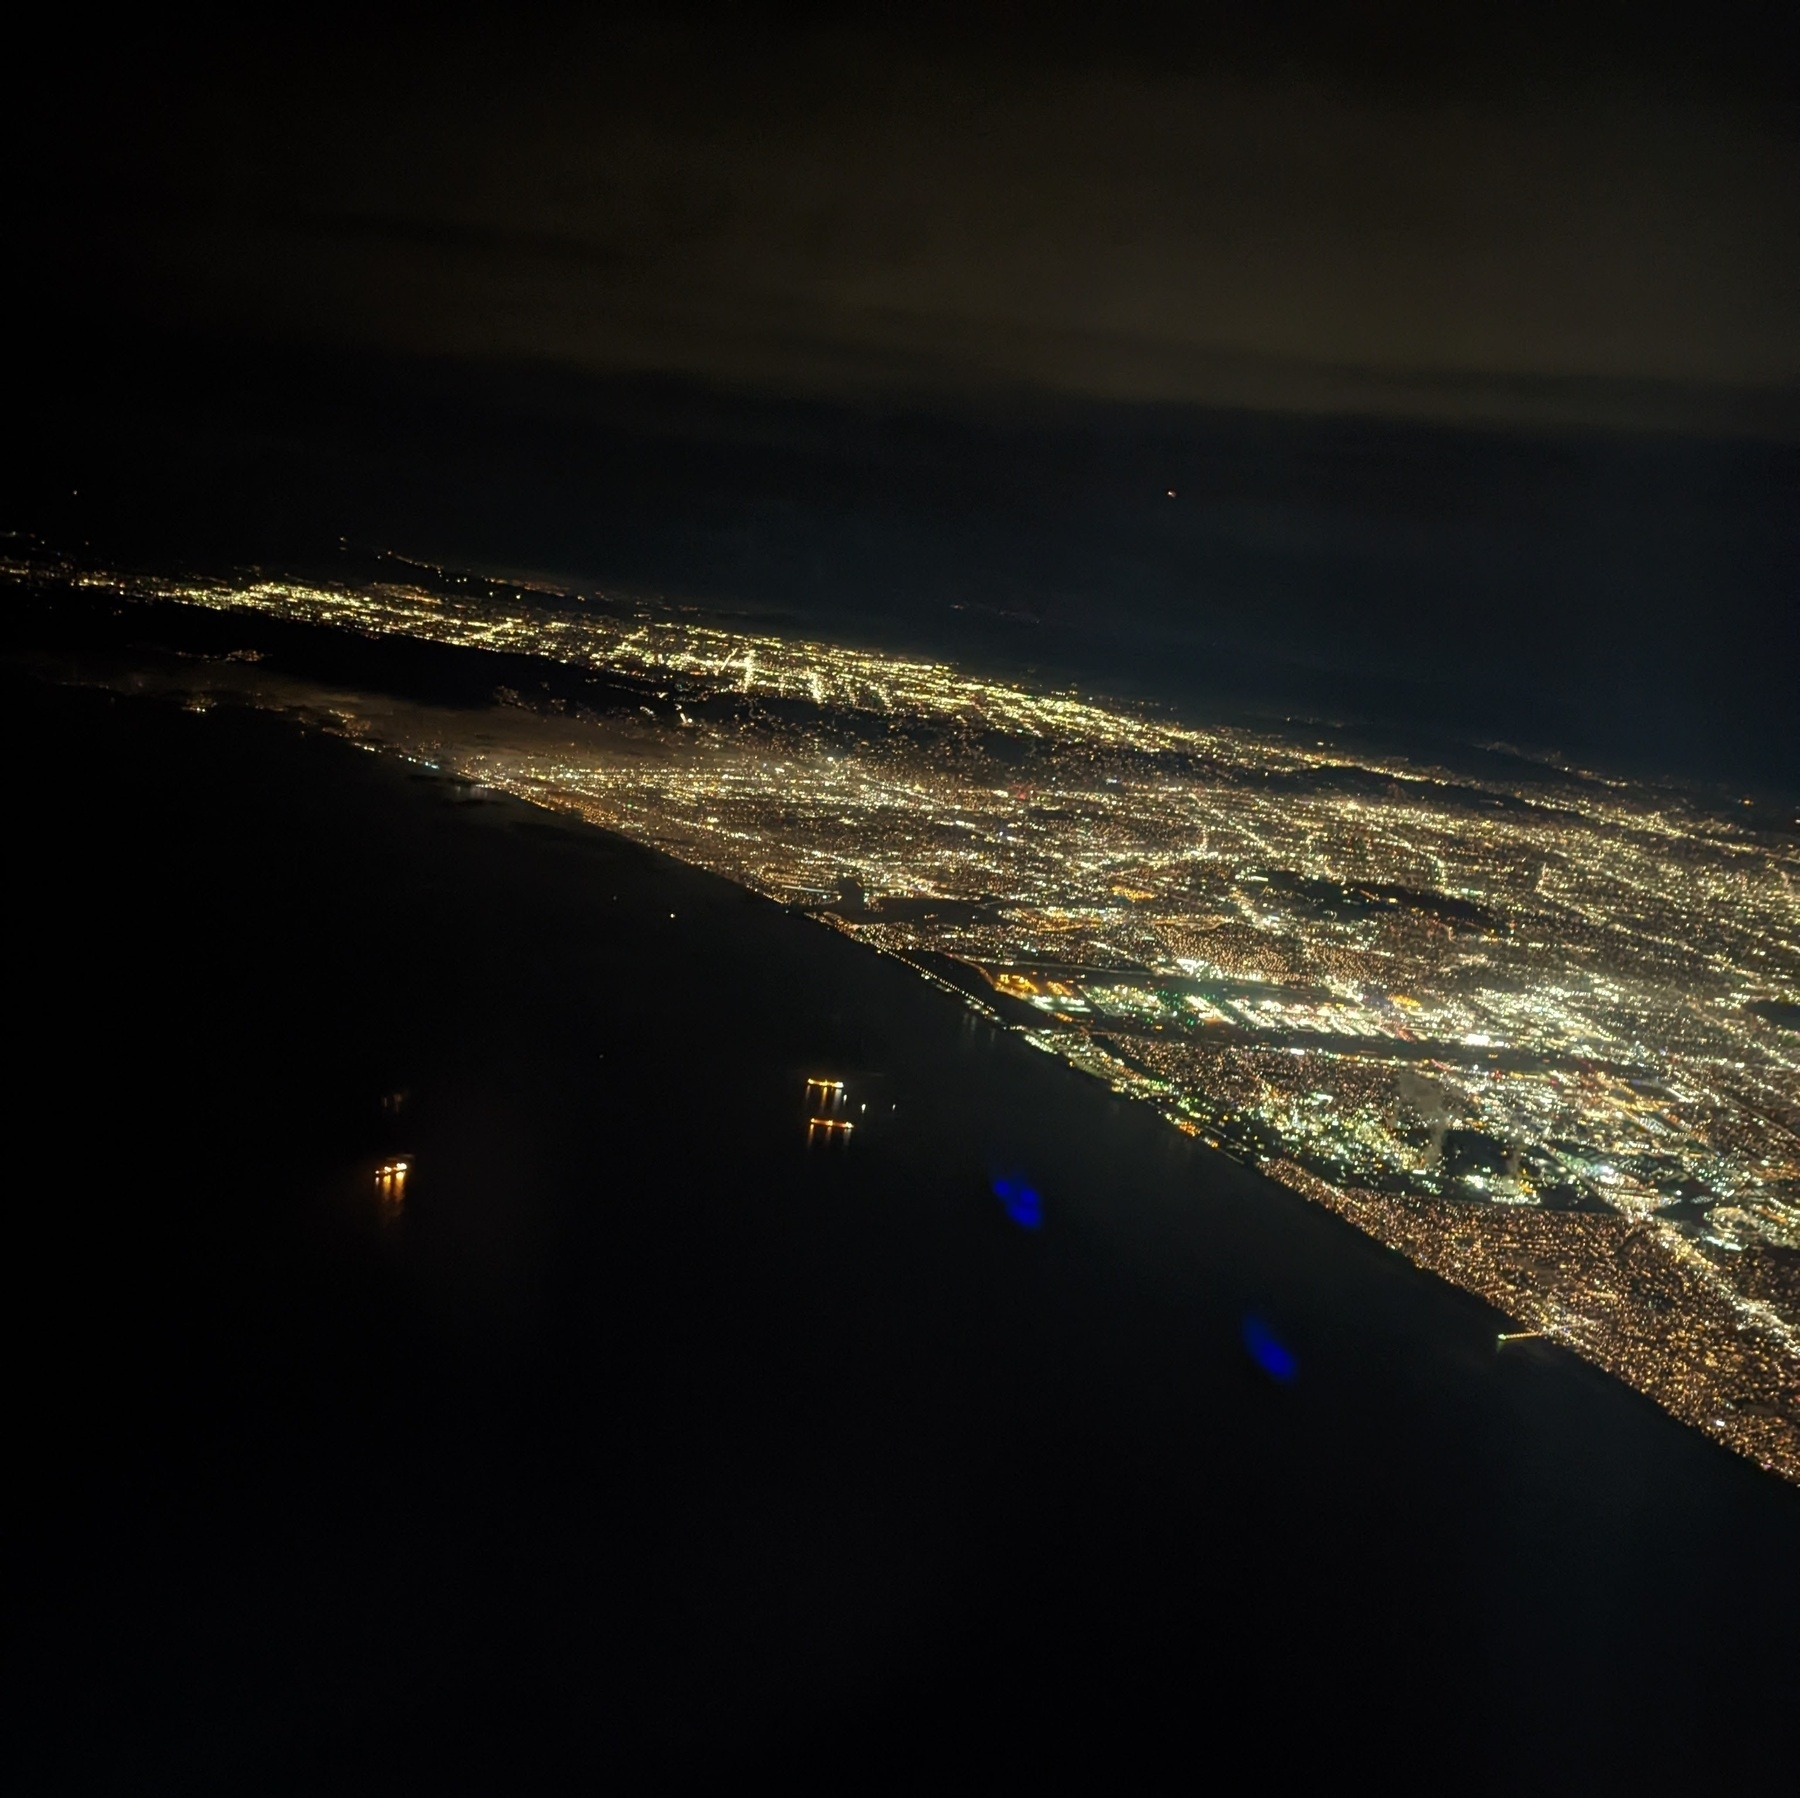 An aeroal photo of a city, Los Angeles, at night; with the city lights contrsting with the darkened bay